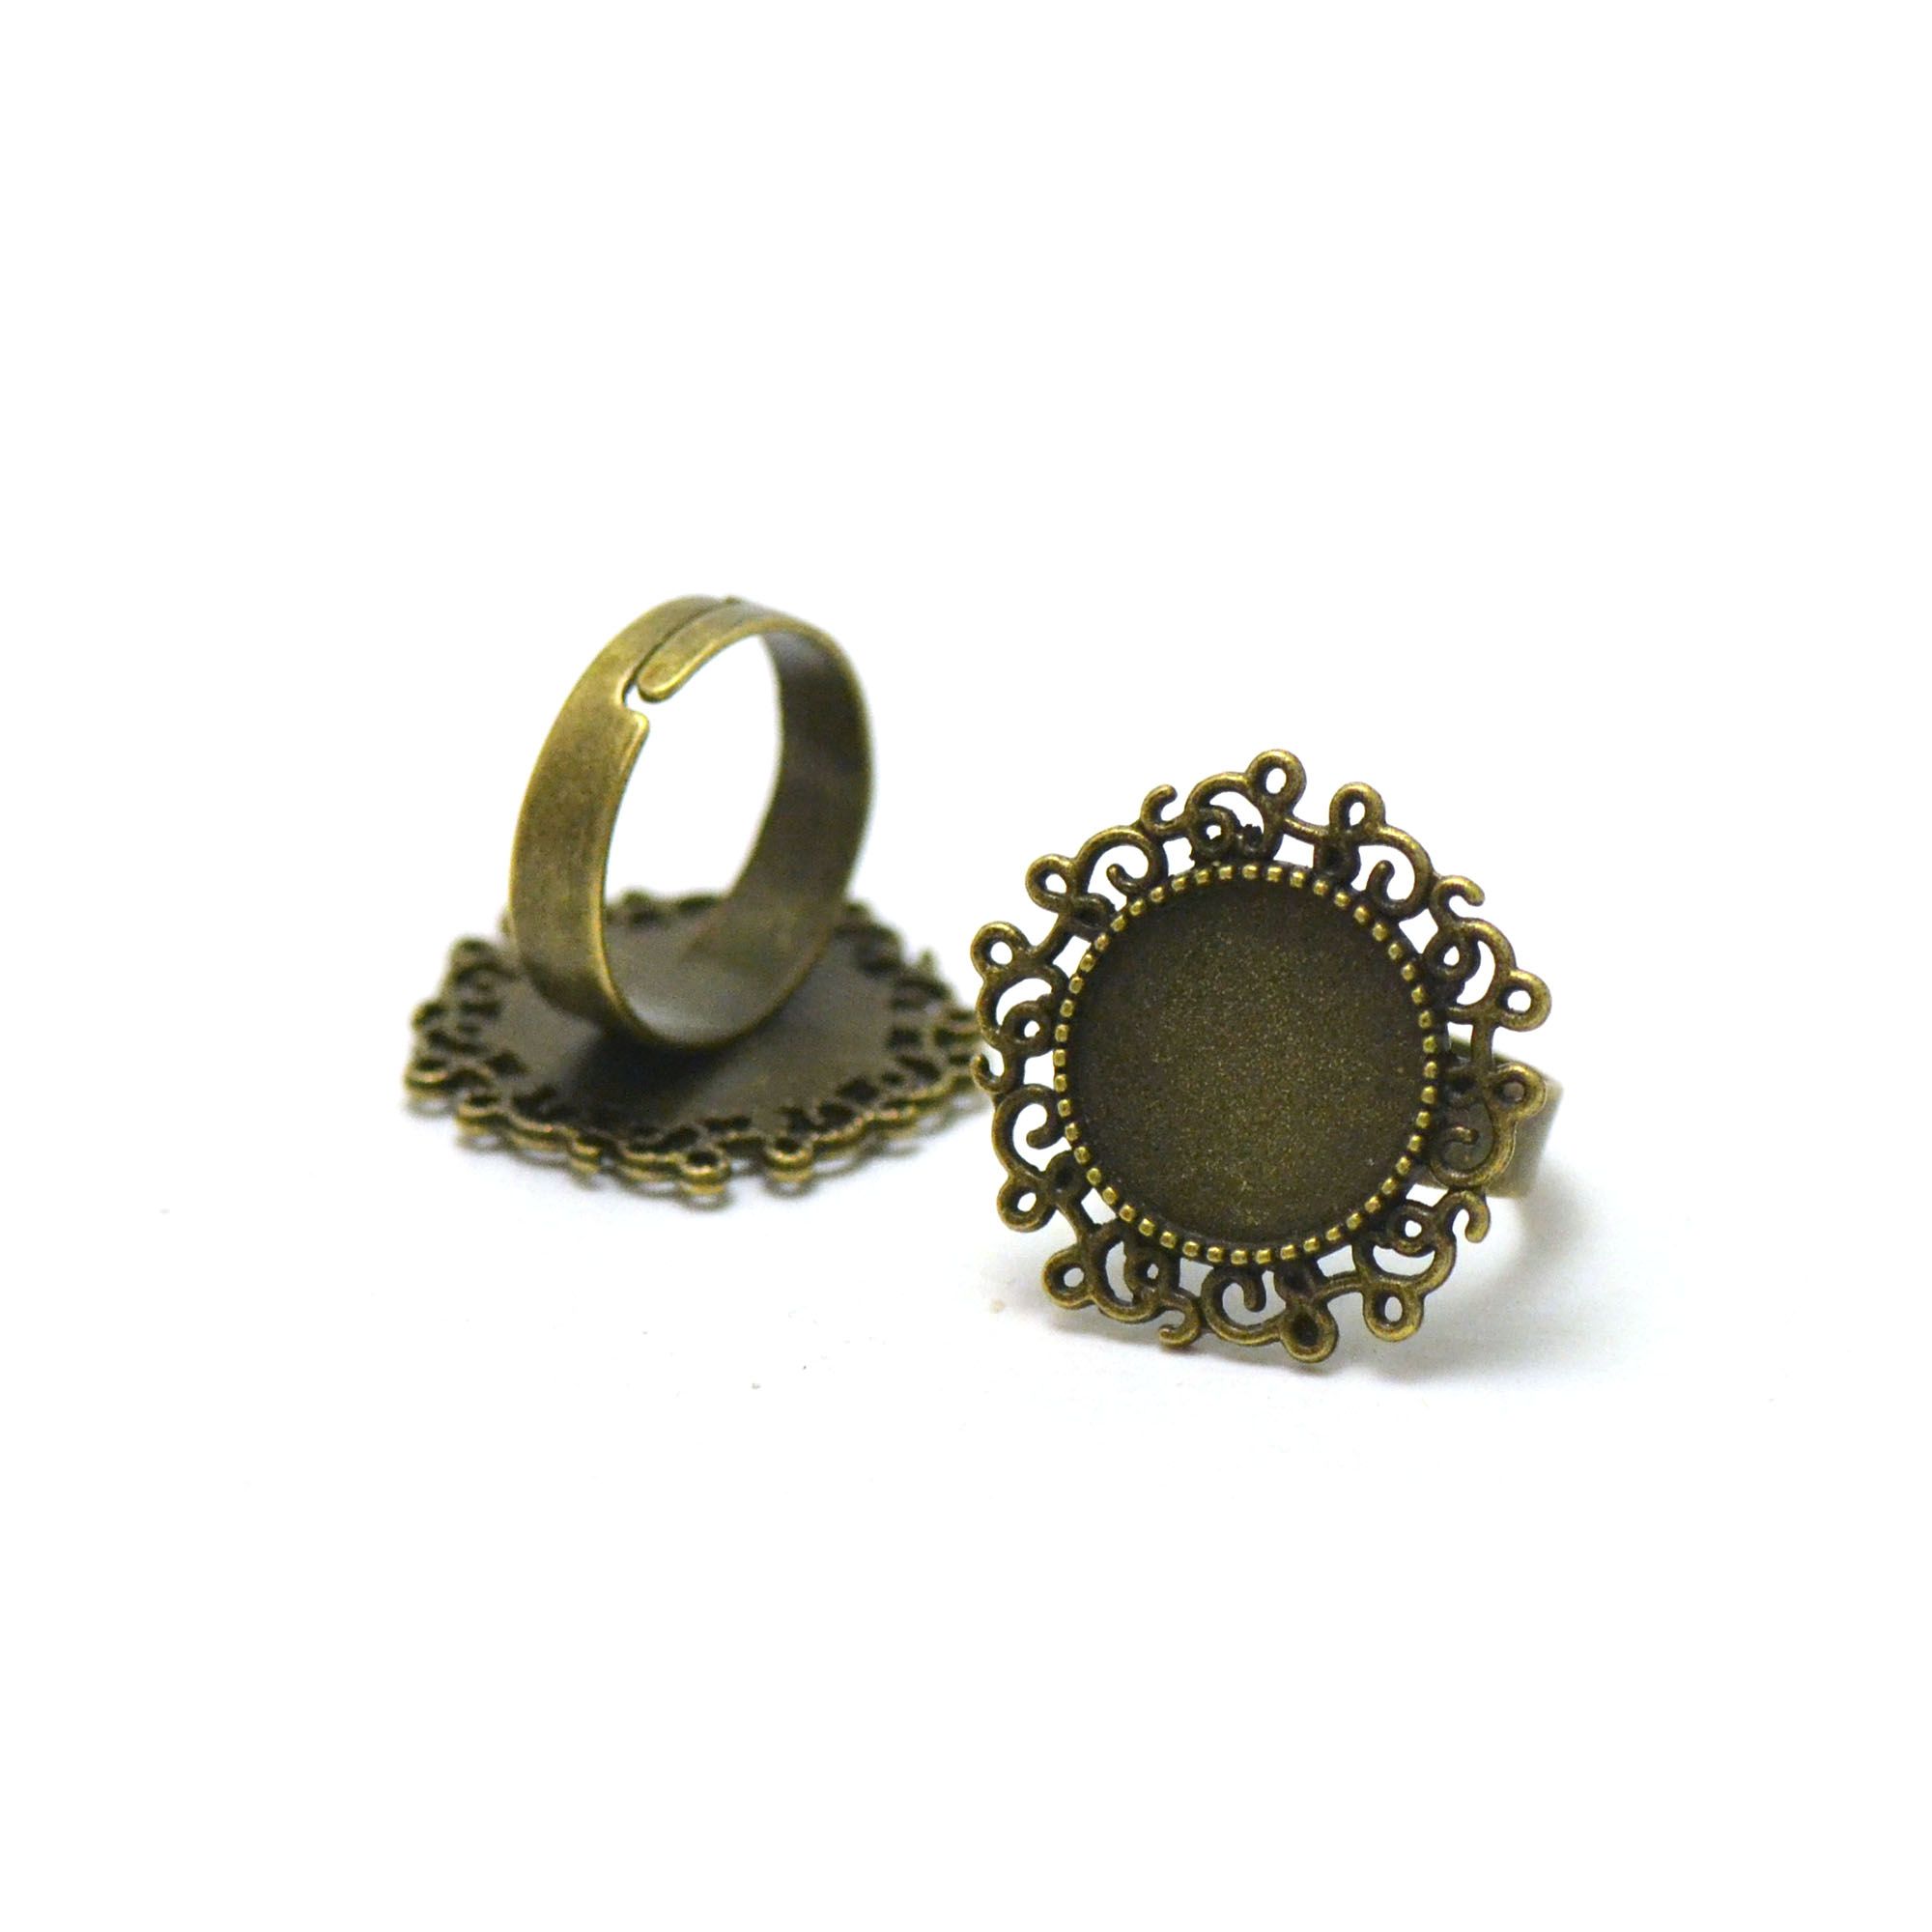 2 supports cabochons bague 14 mm ronde 018, bronze